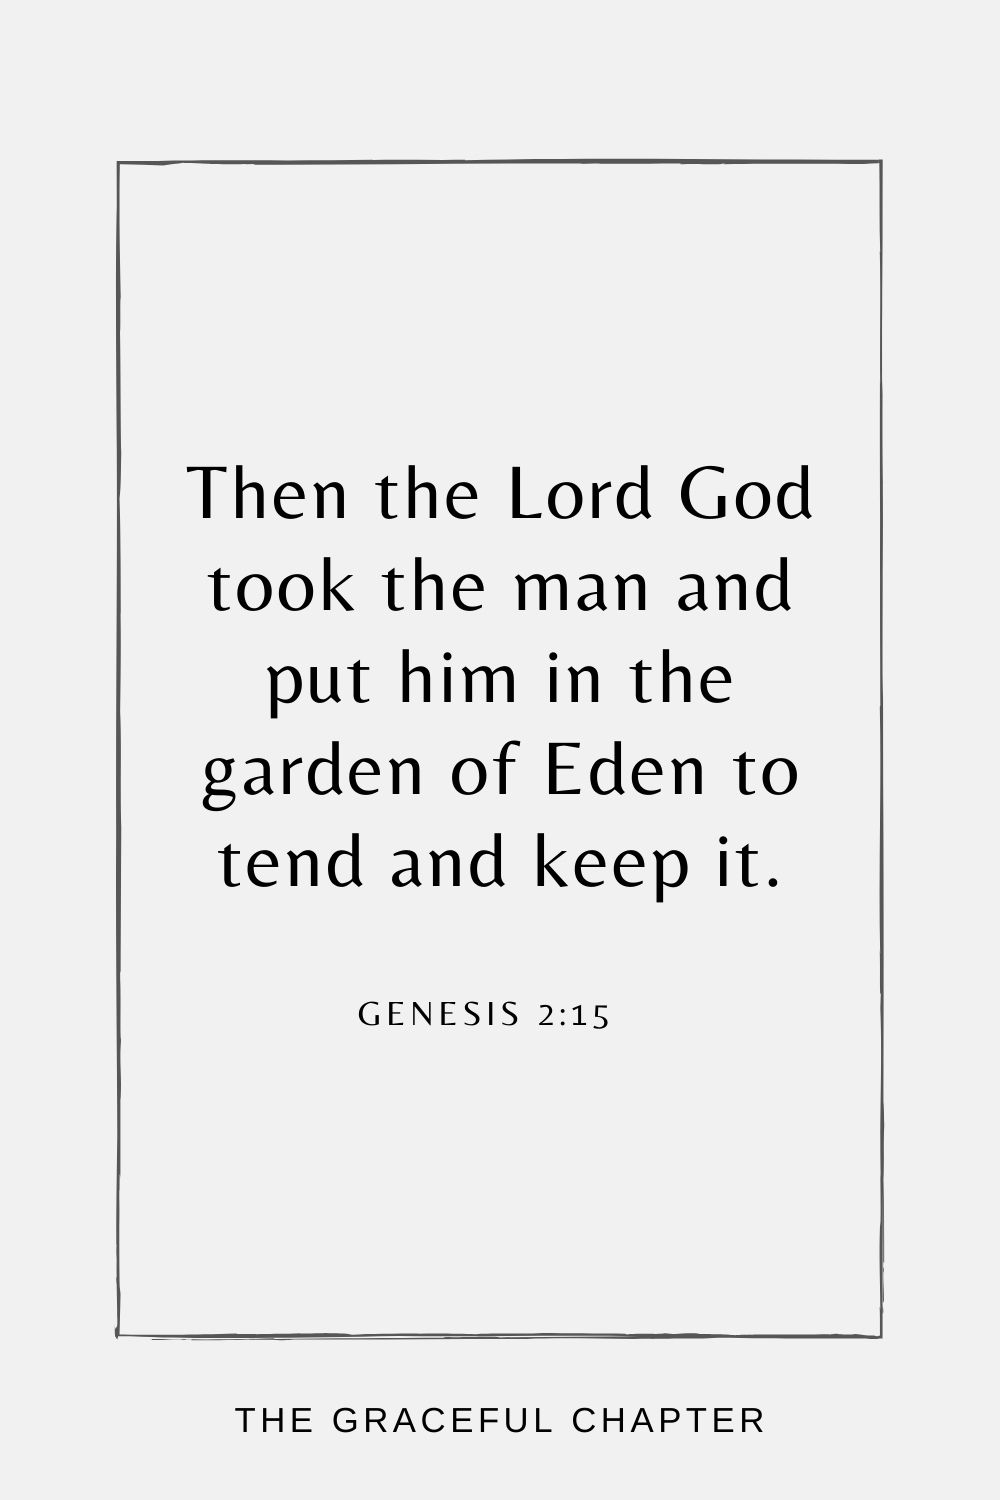 Then the Lord God took the man and put him in the garden of Eden to tend and keep it. Genesis 2:15